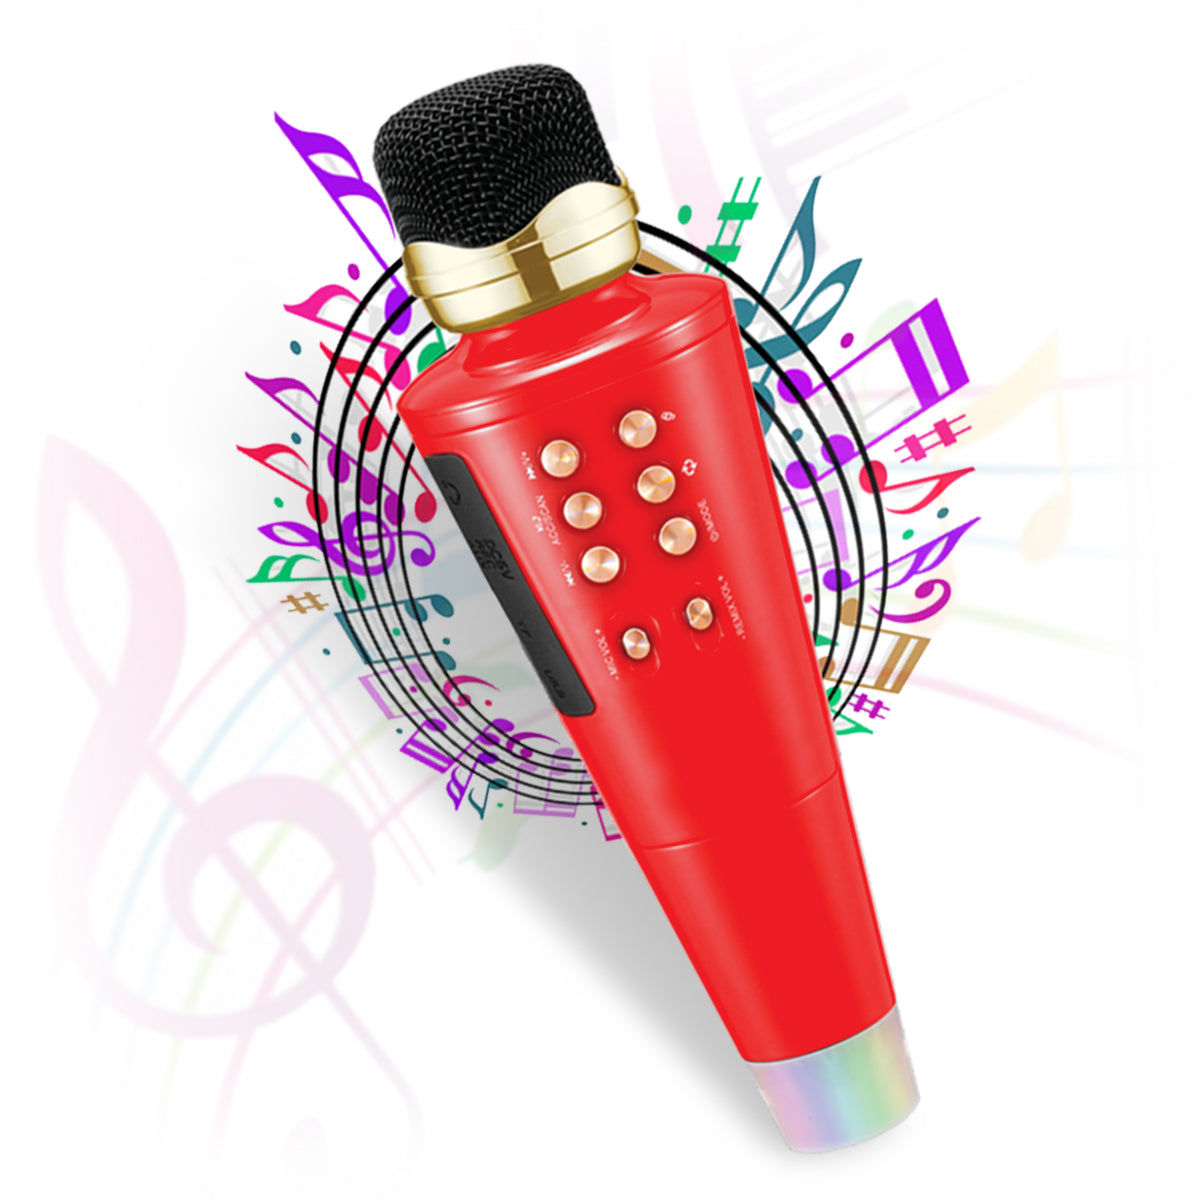 Pick Ur Needs 2 in1 Karaoke Microphone & Bluetooth Speaker with LED Light Wireless Connection Player with Recording + USB+FM